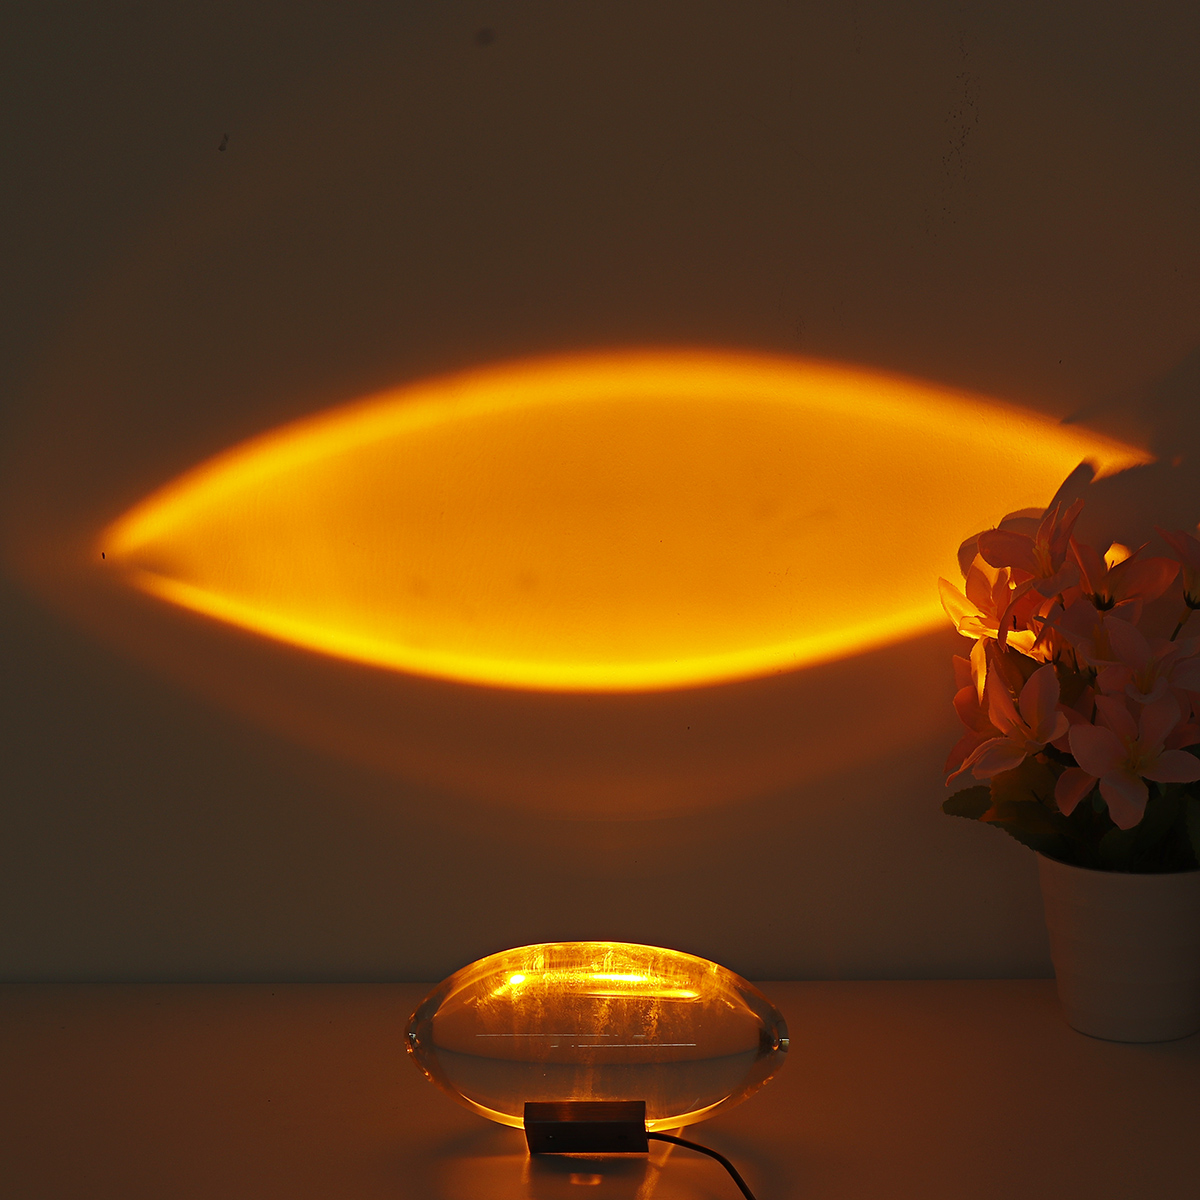 Crystal-Sunset-Projection-Lamp-Decoration-Floor-Bedroom-Night-Light-Atmospheres-1853564-7